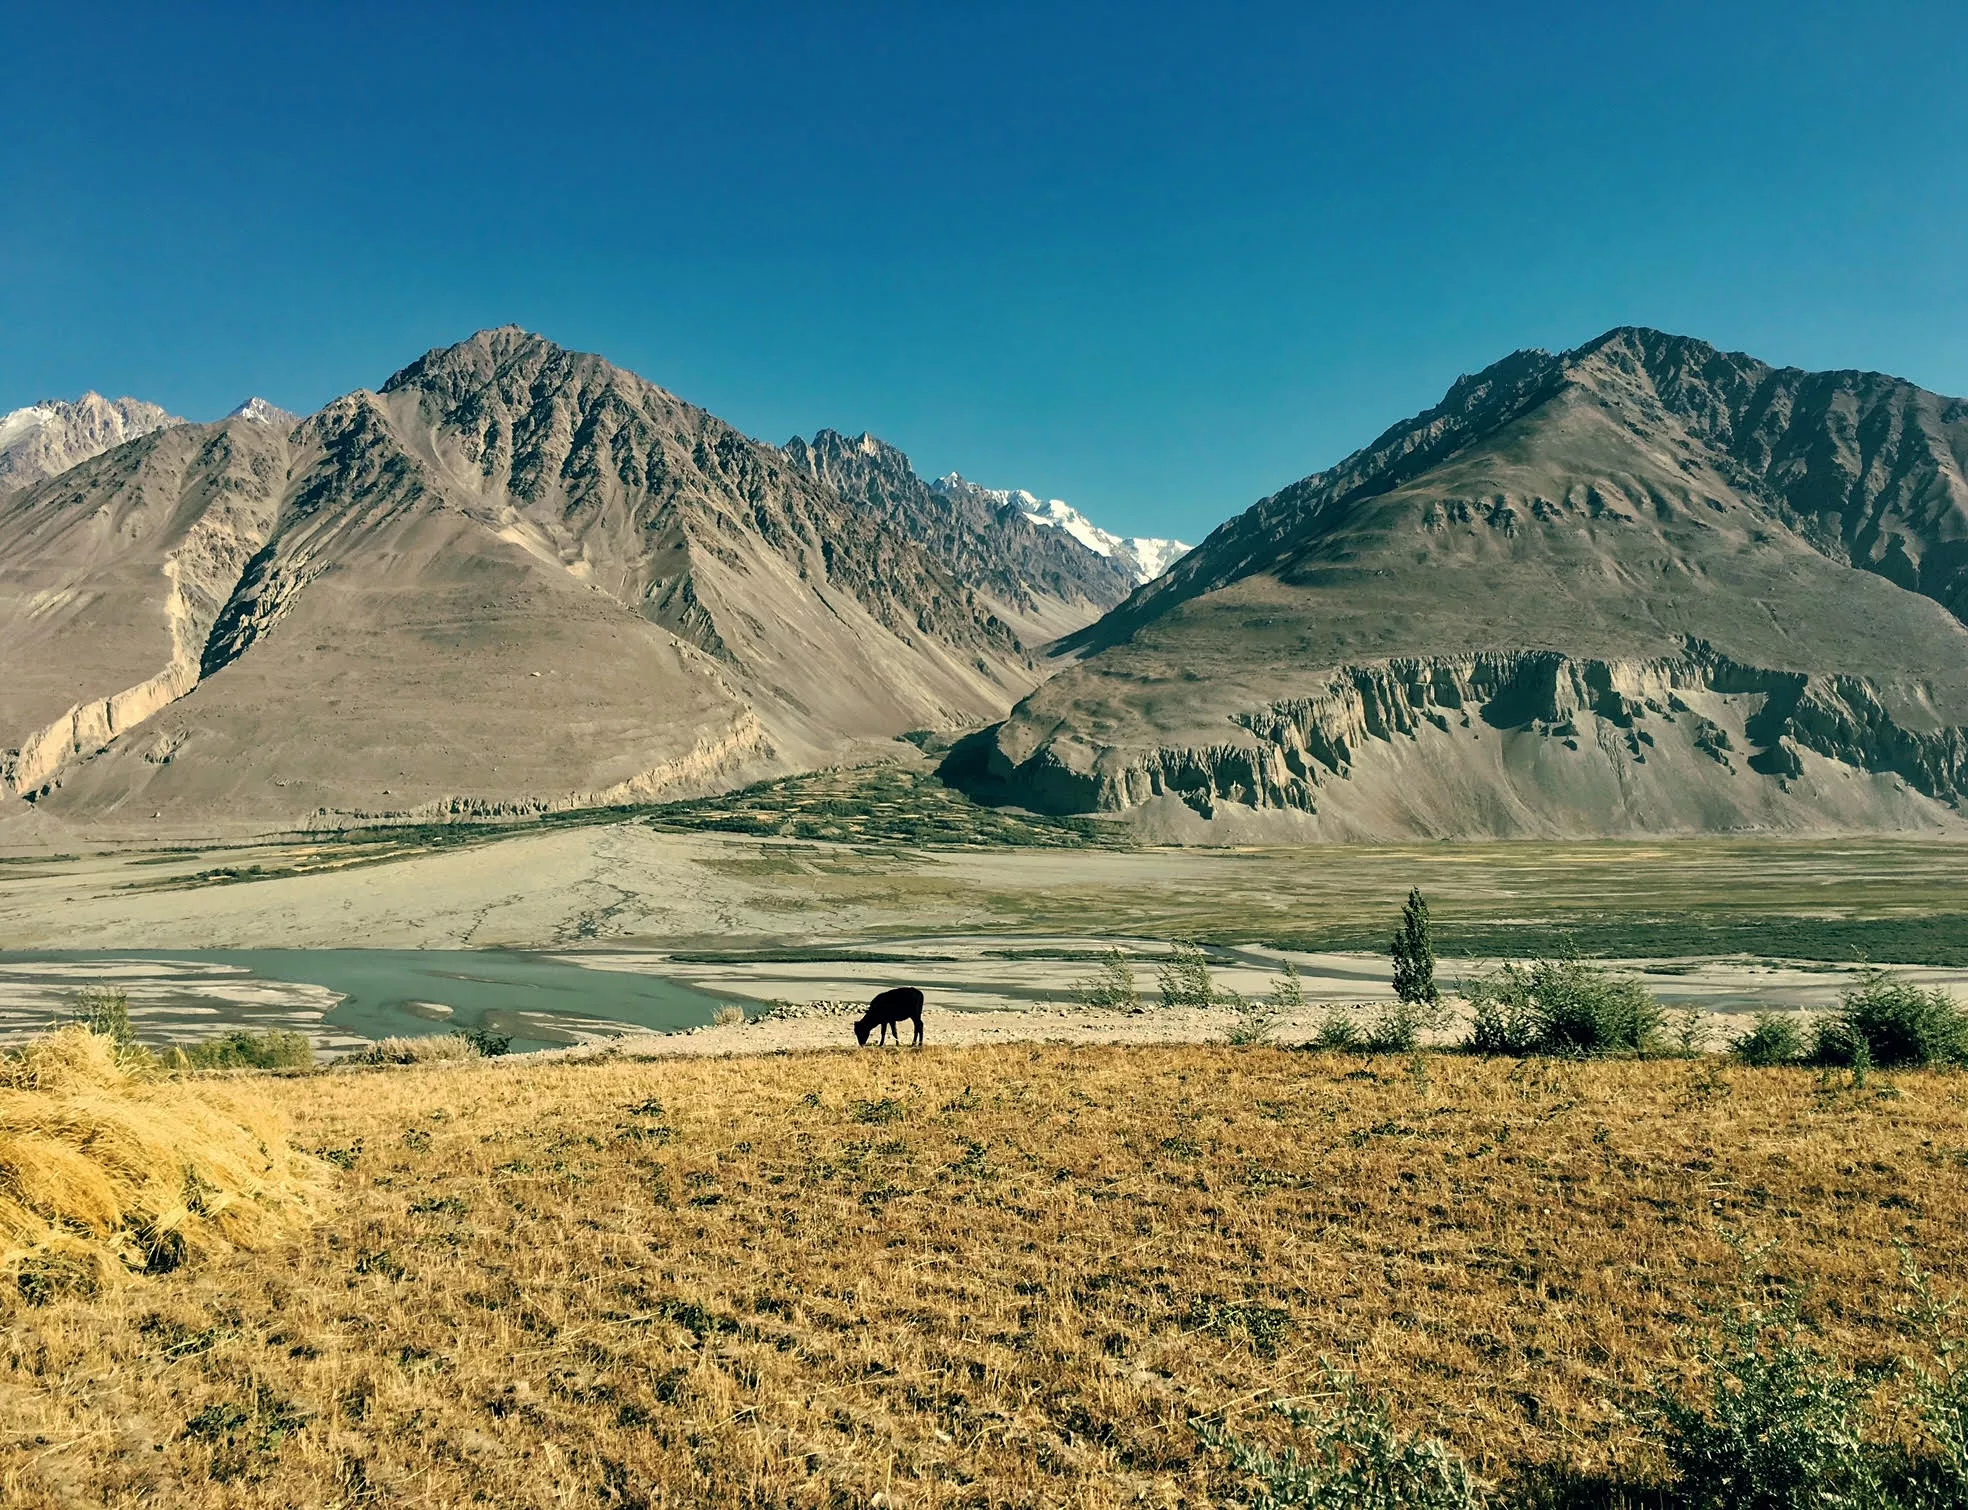 'The Wakhan Valley (among the Afghan counterpart, the Wakhan Corridor) is undoubtedly one of the most remote places that I have been to and that I am aware of. Situated along the Panj river on a detour from the historically famous Pamir Highway, the Tuggoz village (where this picture was taken) lies about 700km away from the nearest cities with considerable facilities (Dushanbe and Osh), in either direction of travel no less than a 3-day drive. The remoteness of the village (with its stunning views of the Afghan Wakhan mountains) is a true questioning on the meaning of globalisation.' – Rubian Renz Dalpian